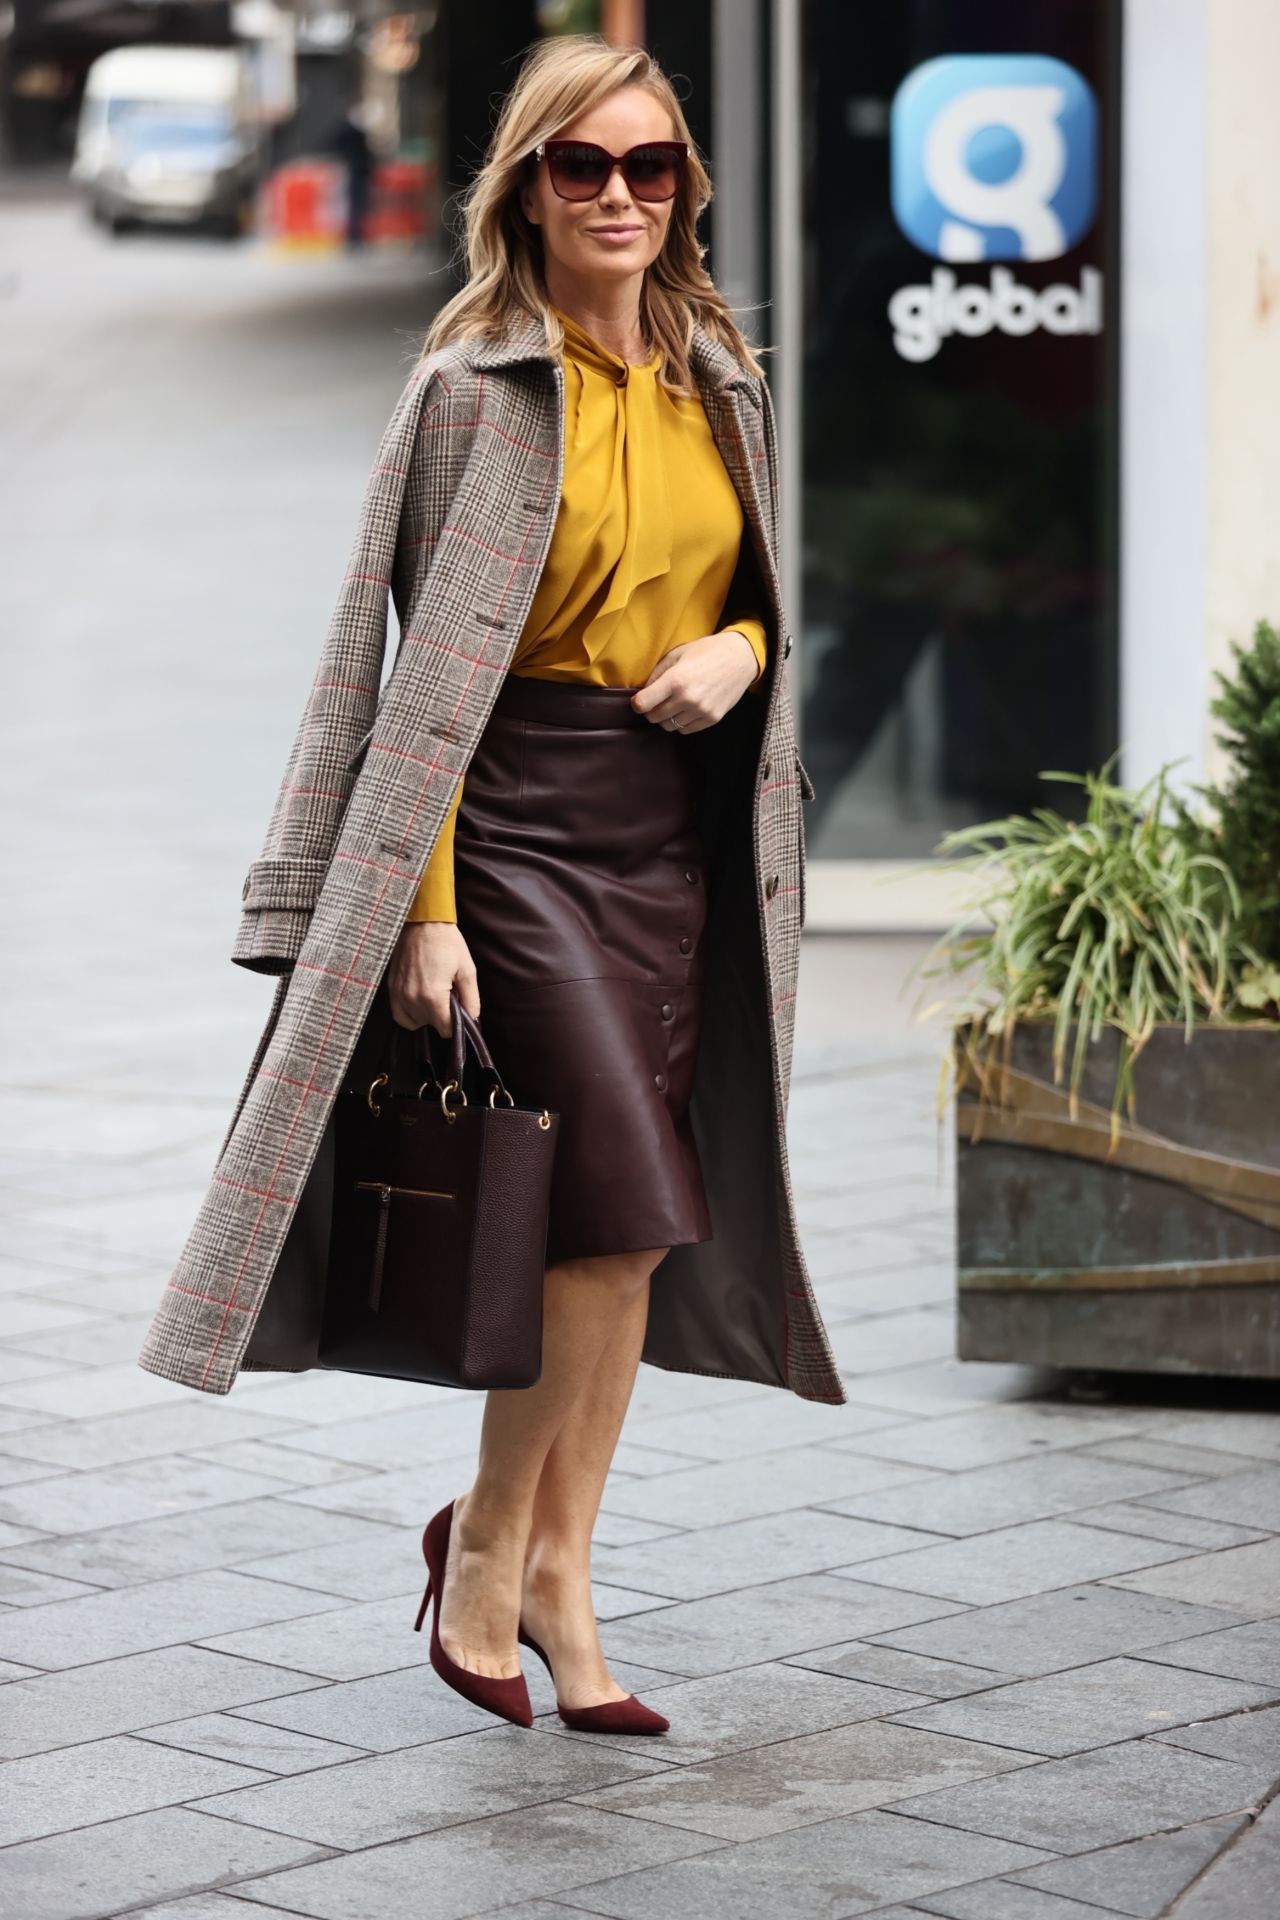 Amanda Holden in Burgundy Leather Dress and Mustard Yellow Top - London ...